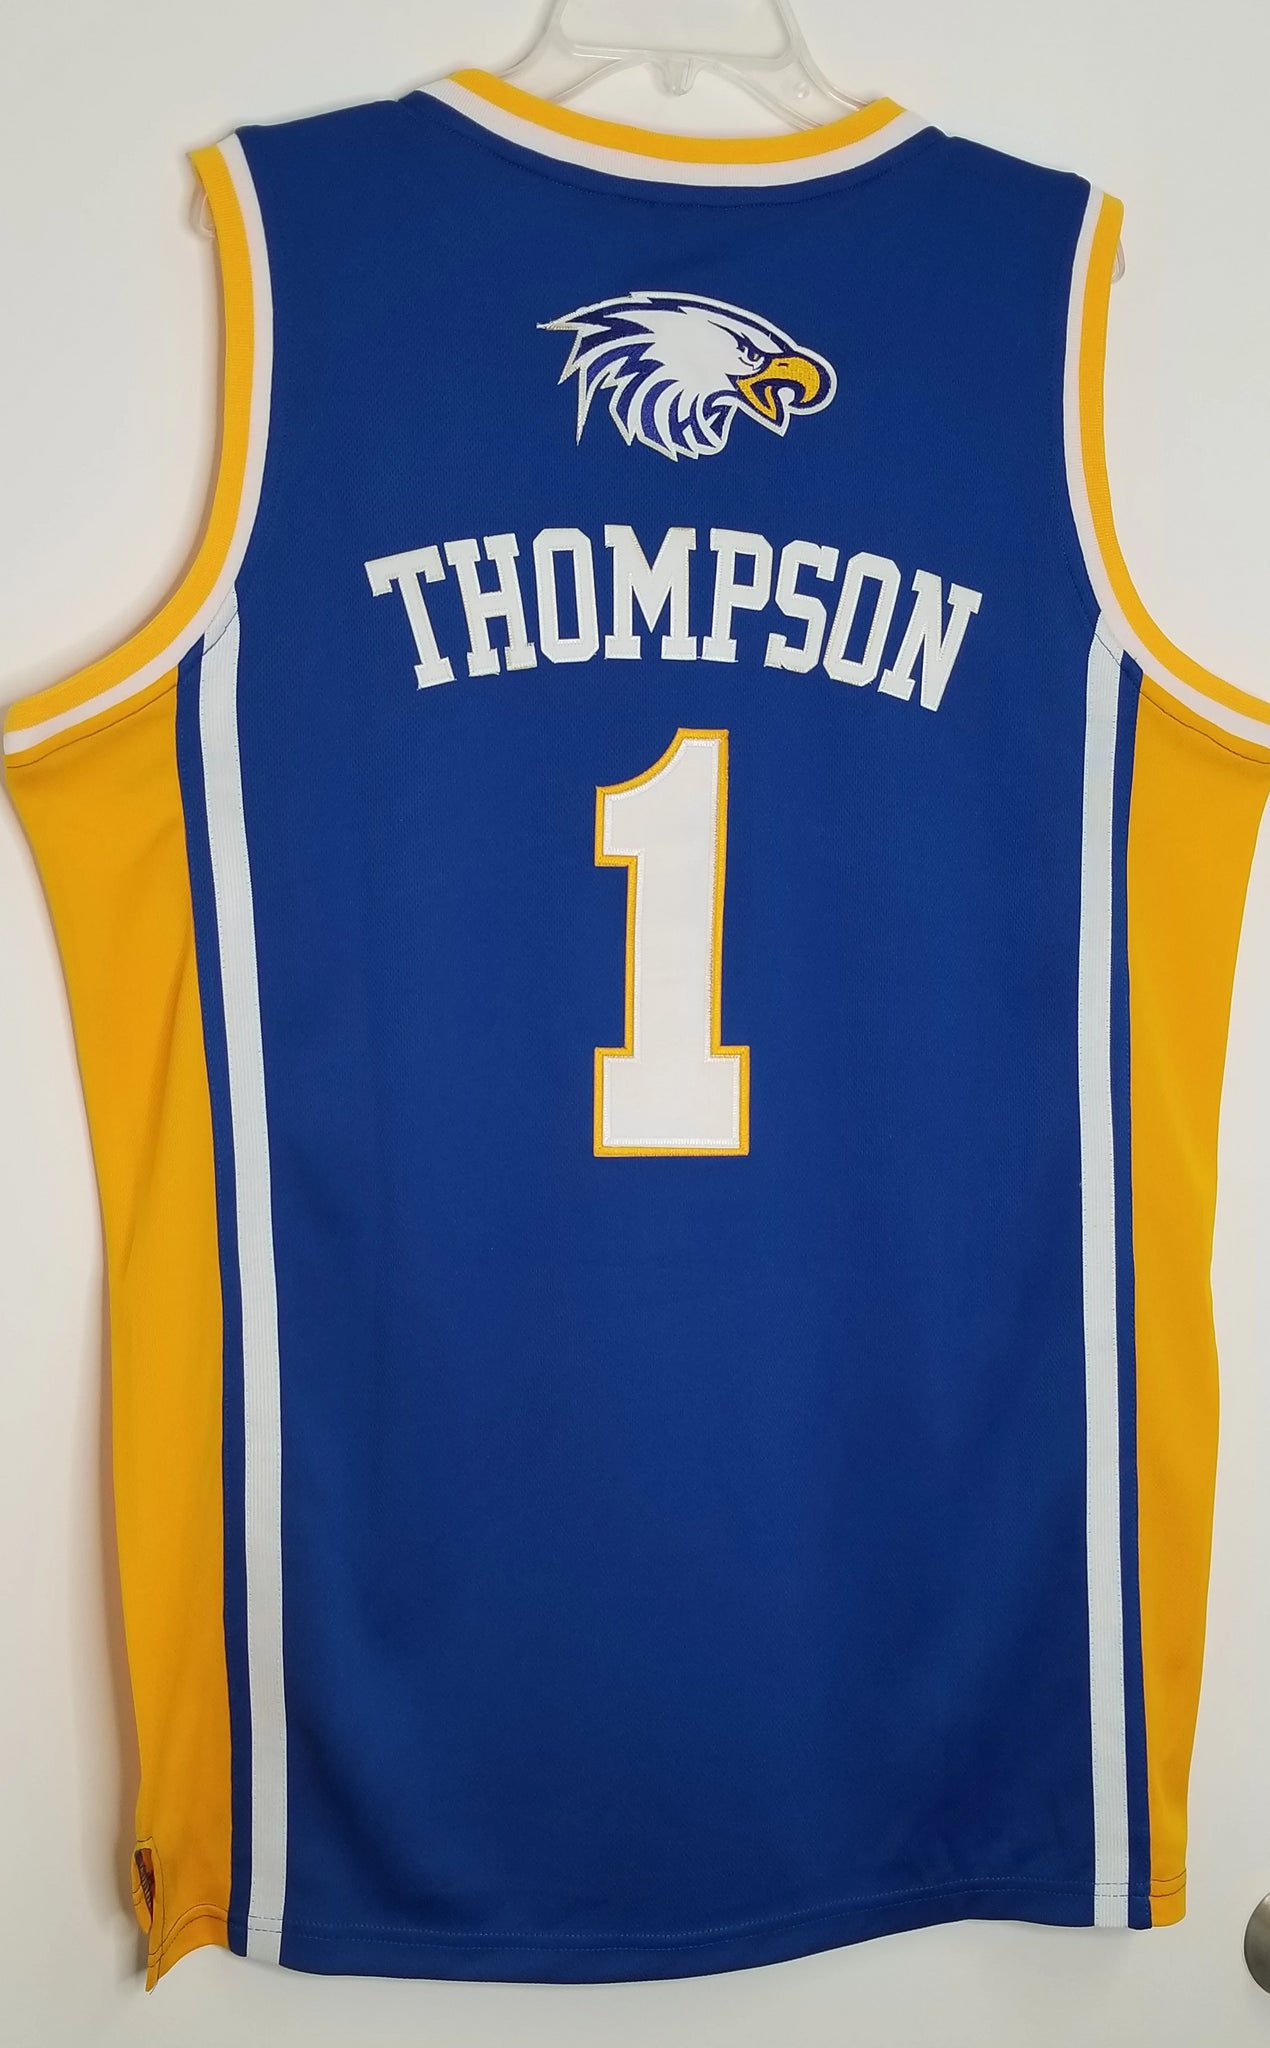 Klay Thompson Jersey for Sale in San Diego, CA - OfferUp